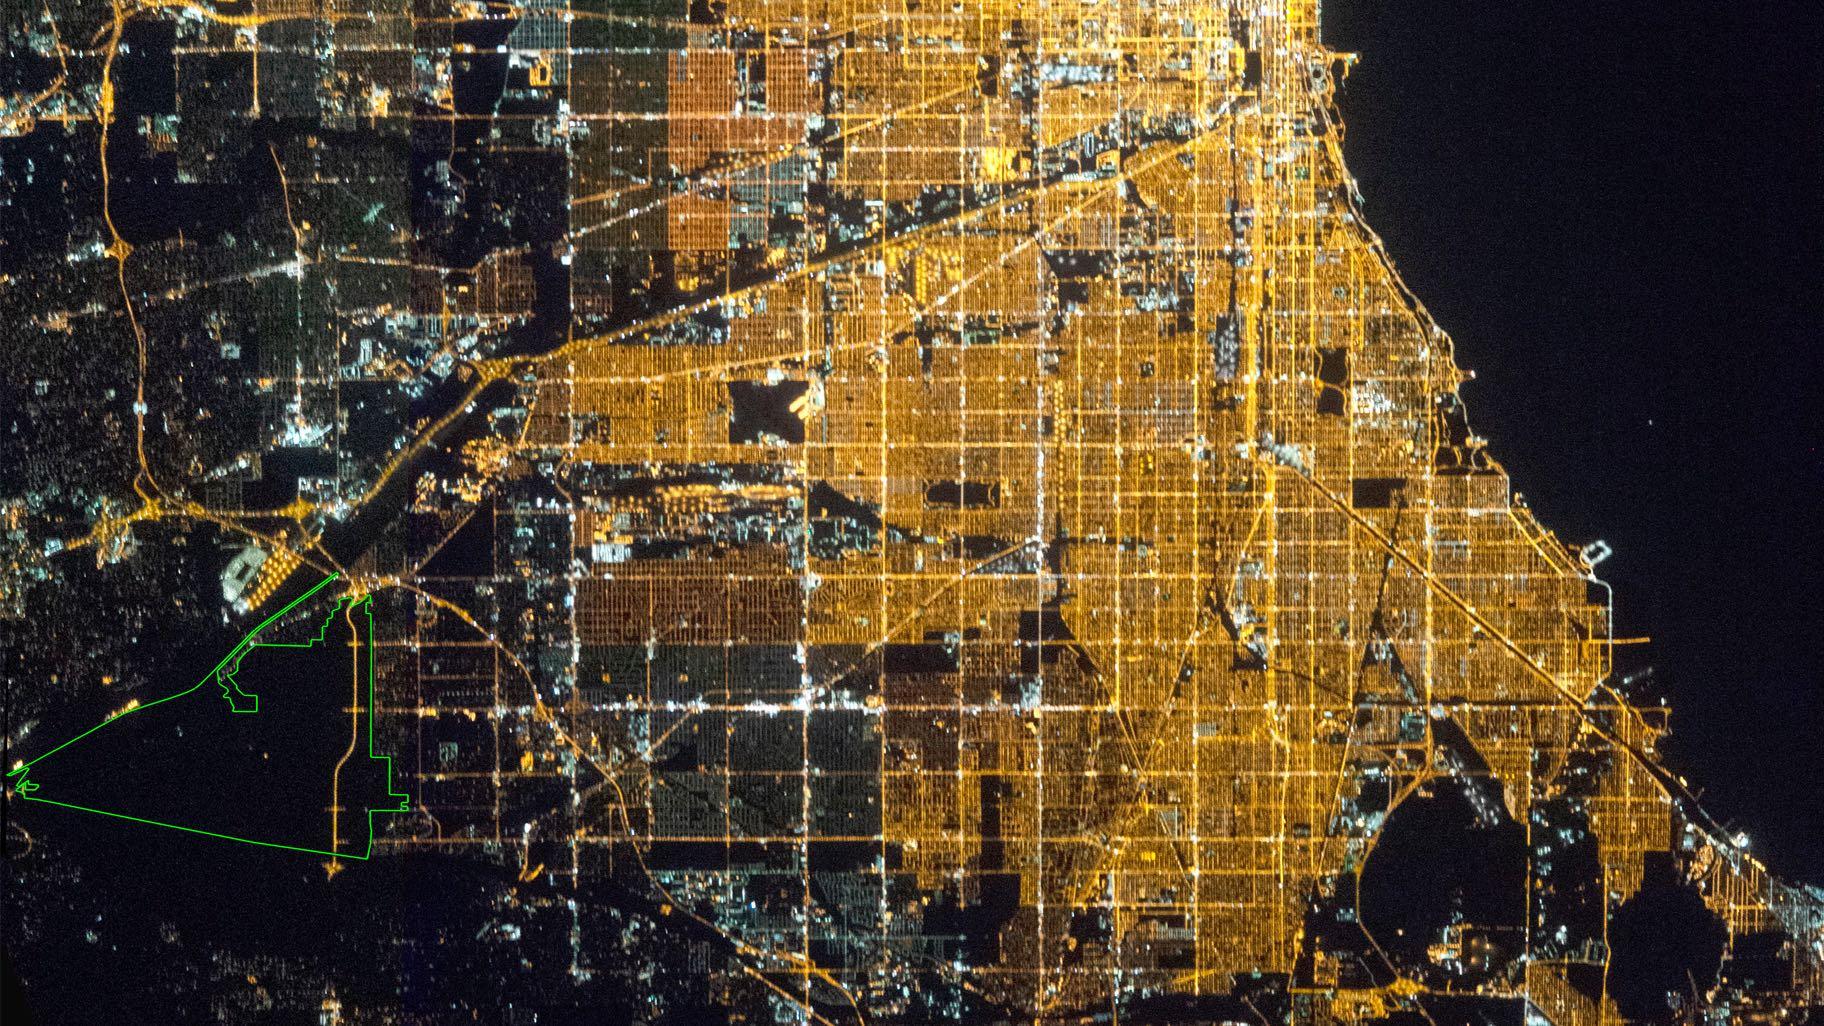 Chicago as seen from the International Space Station. The Palos Preserves Urban Night Sky Place is outlined in green. (Courtesy of the Earth Science and Remote Sensing Unit, NASA Johnson Space Center)